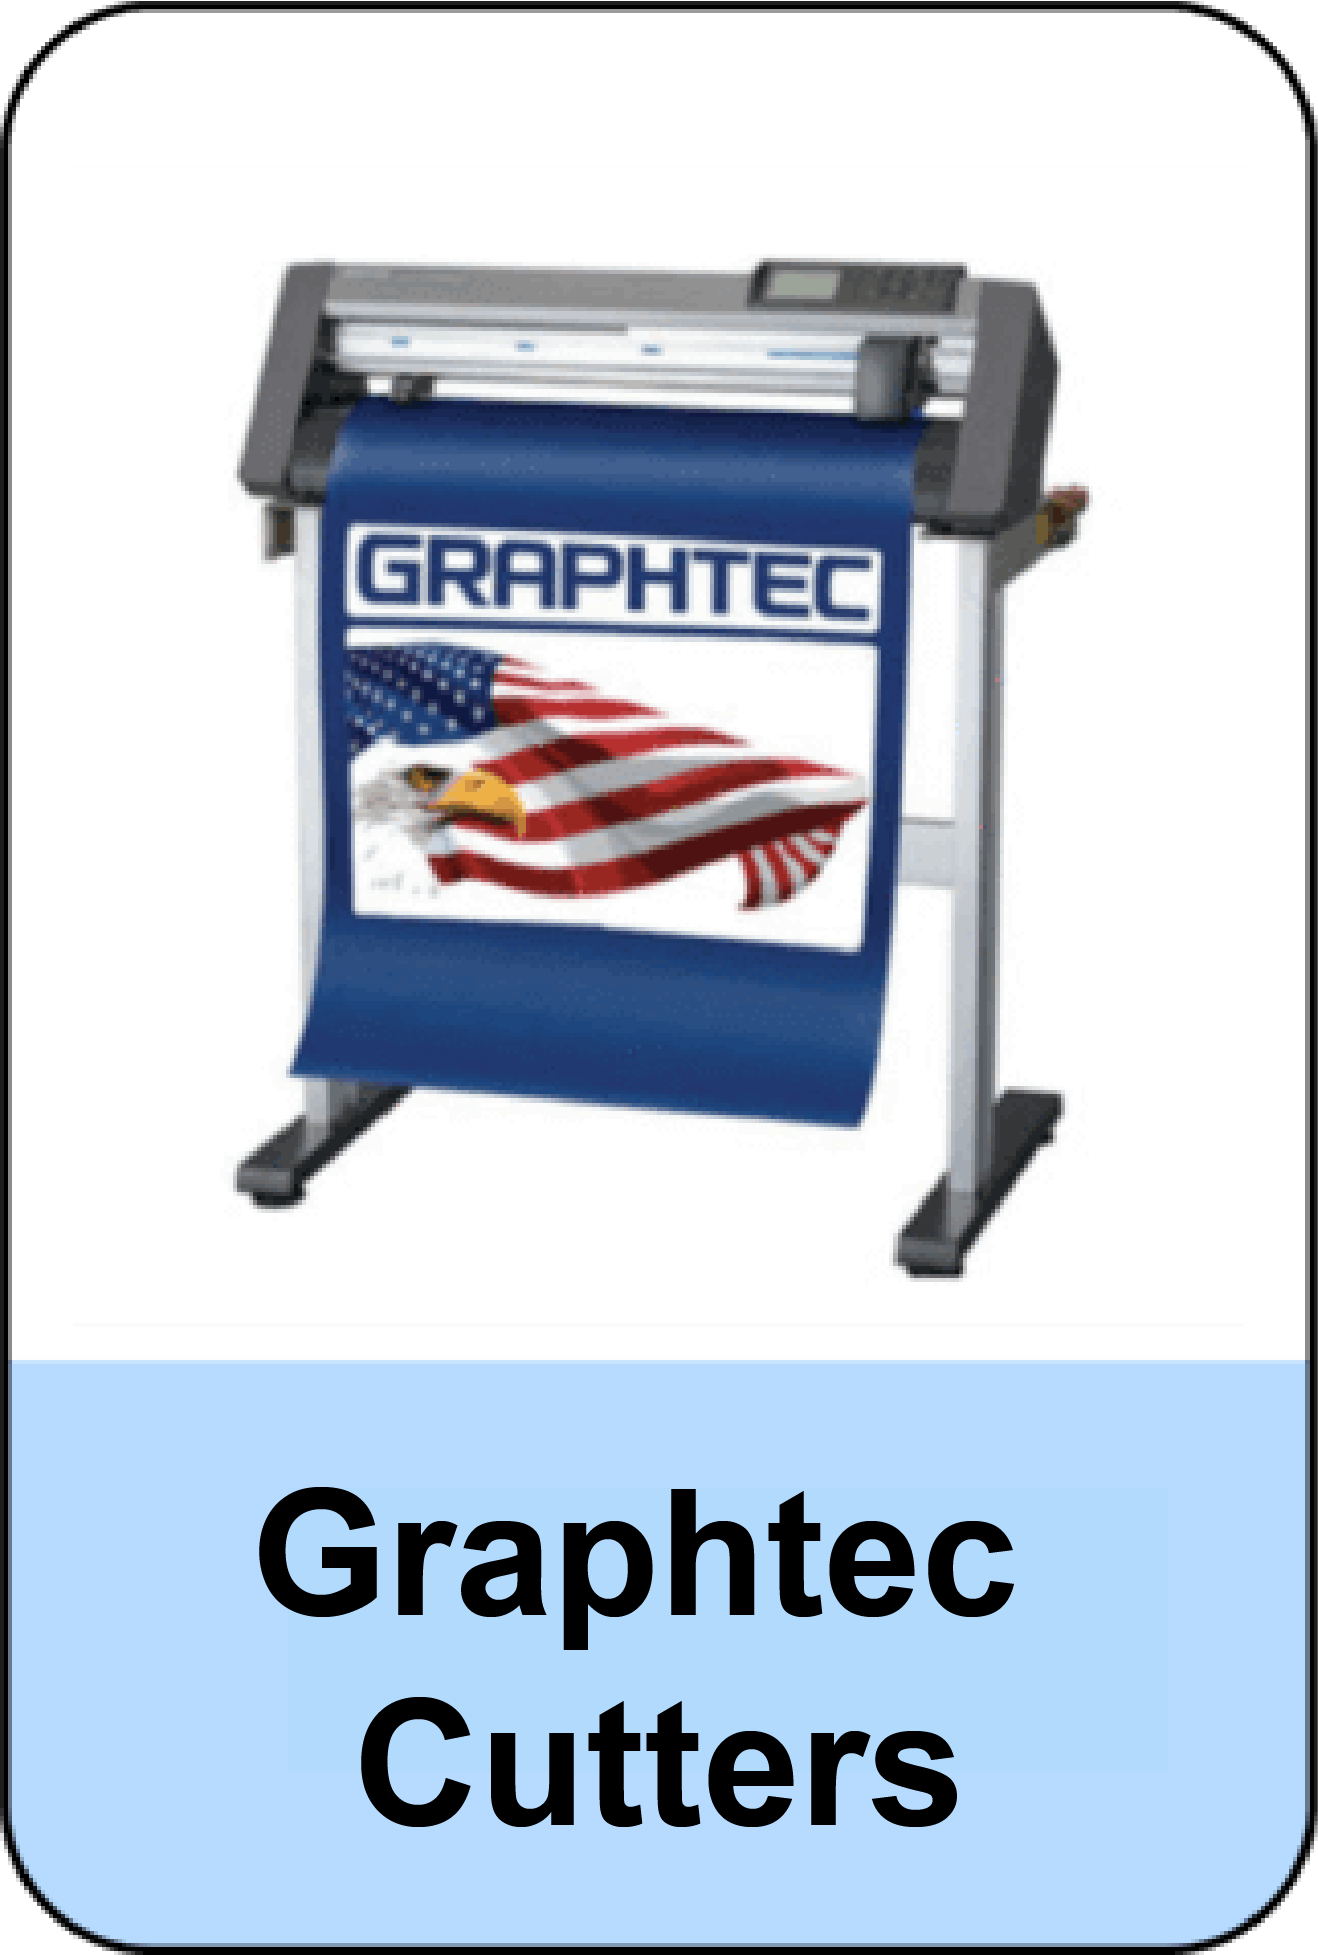 Graphtec curved edge boxes for sale